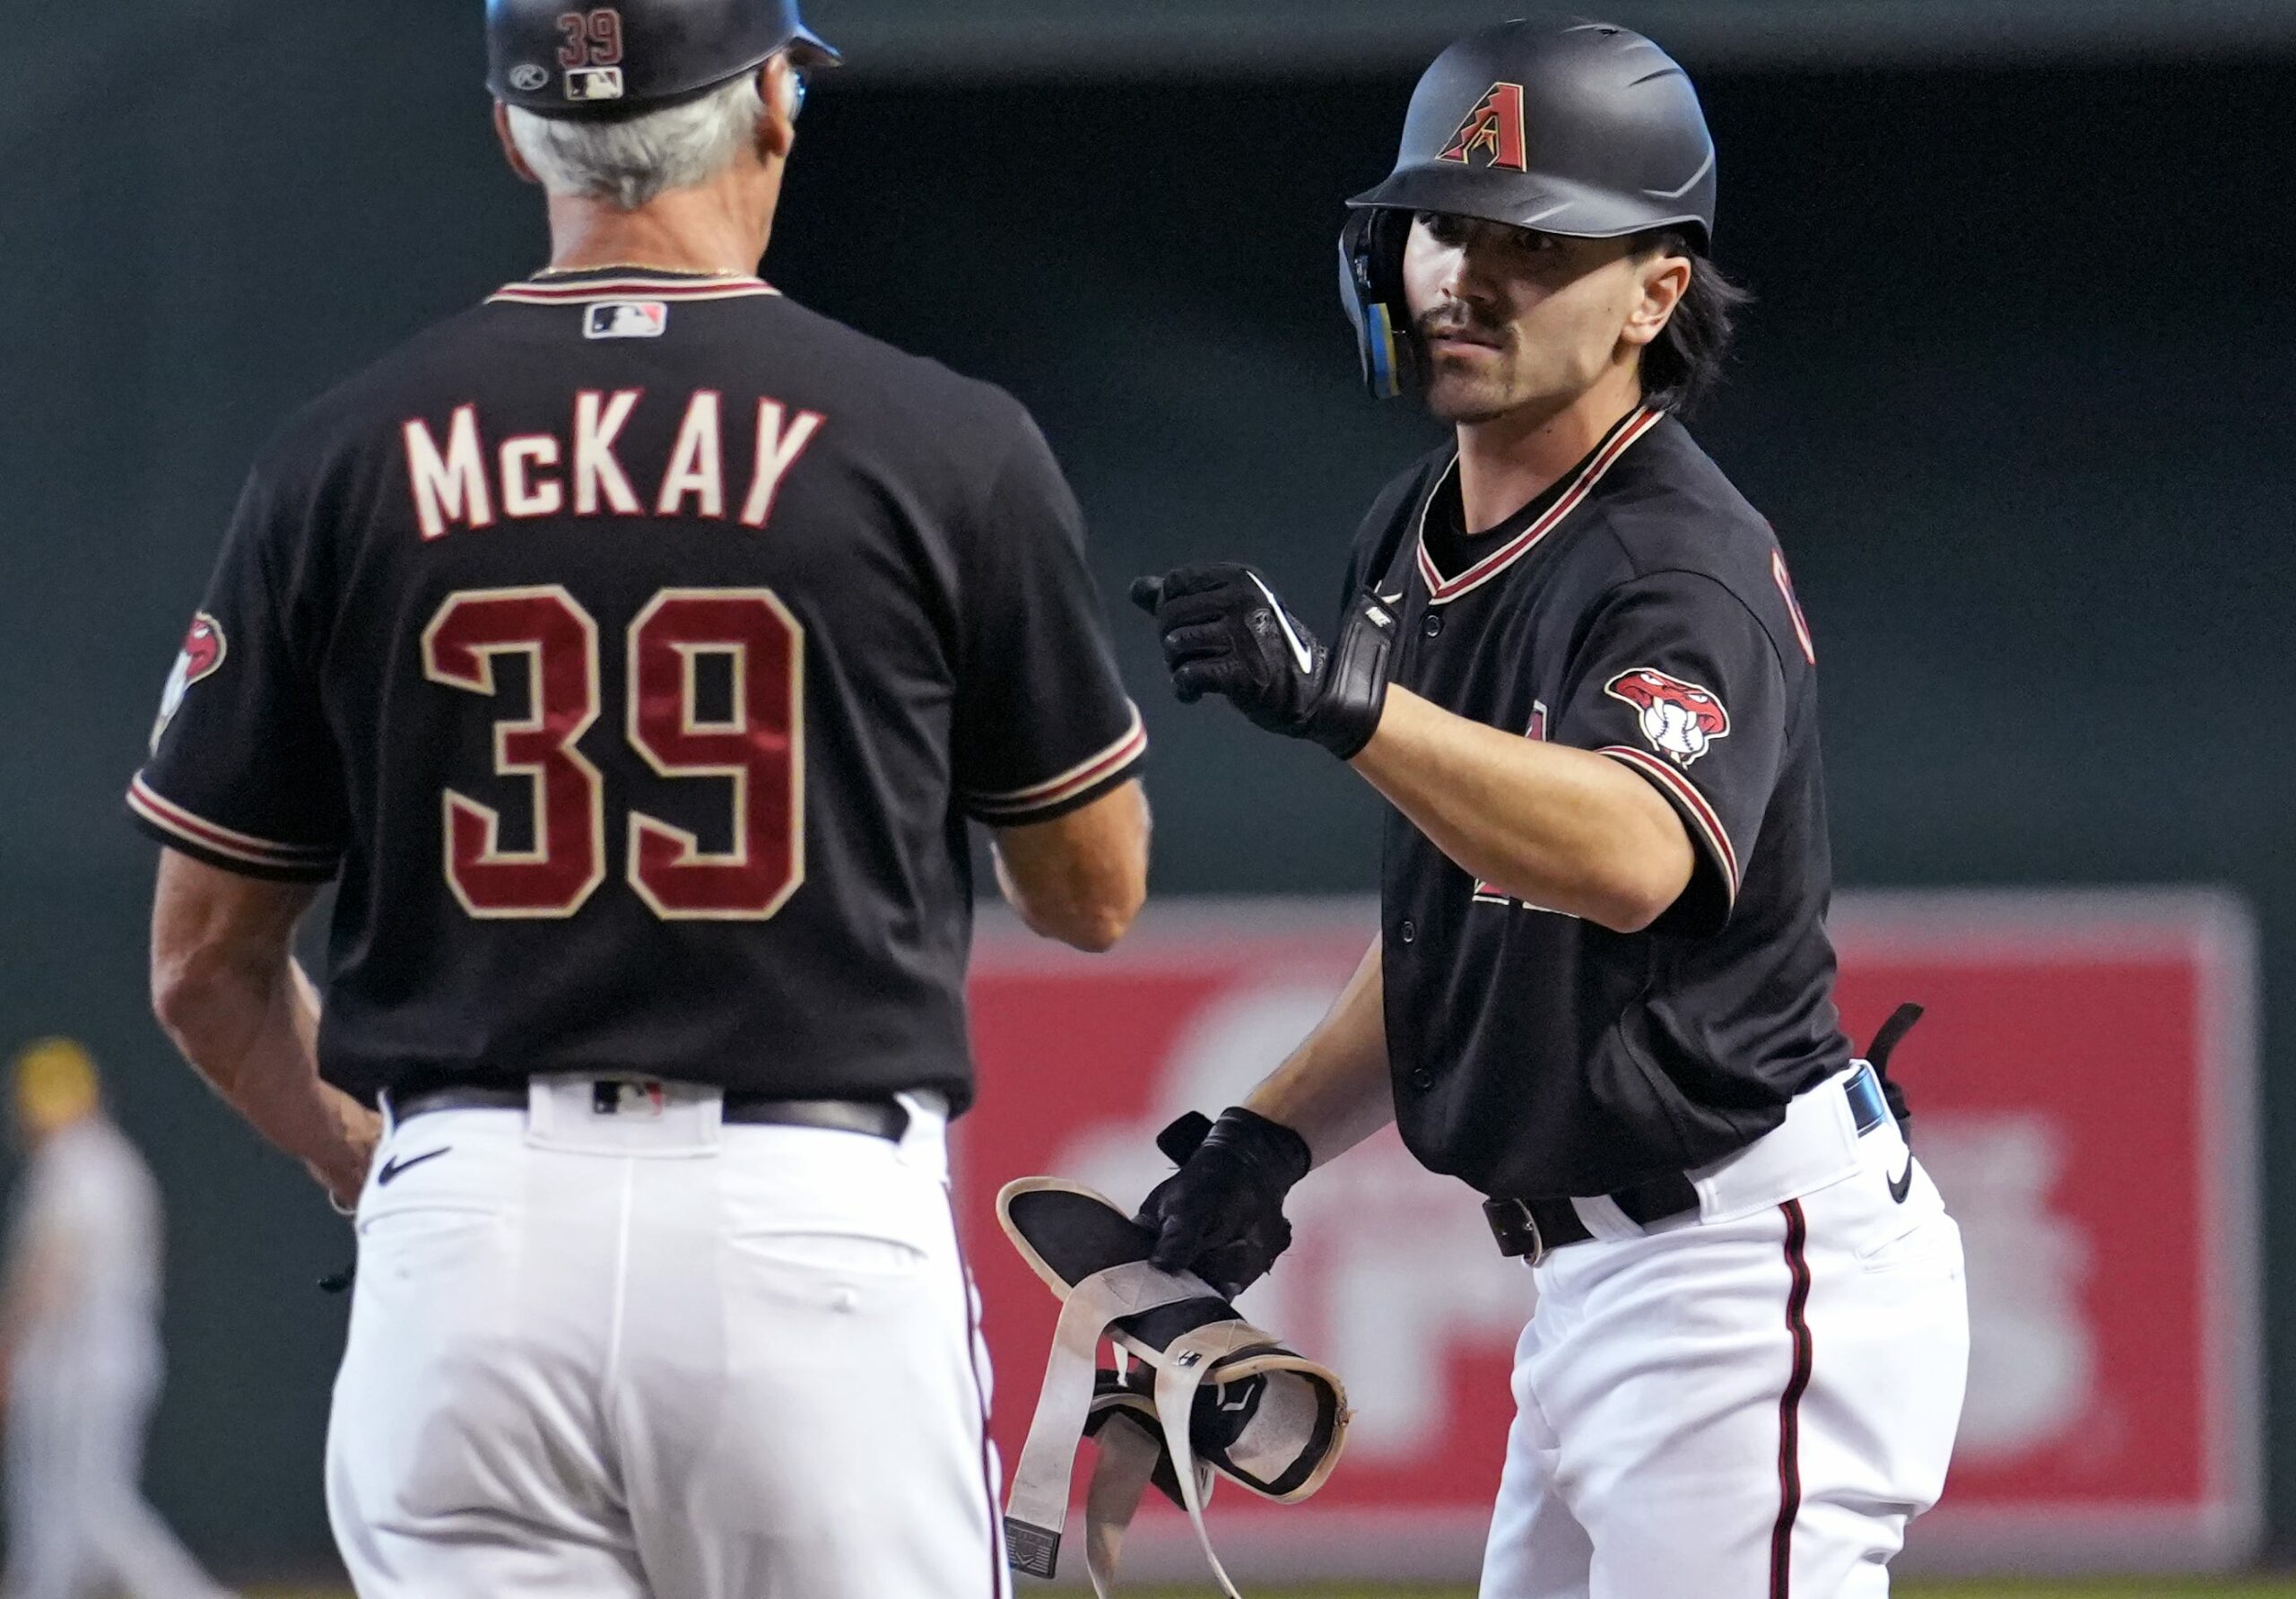 Diamondbacks outfielder Corbin Carroll fist bumps first base coach Dave McKay after his RBI single against the Milwaukee Brewers at Chase Field. (Joe Rondone/Arizona Republic)